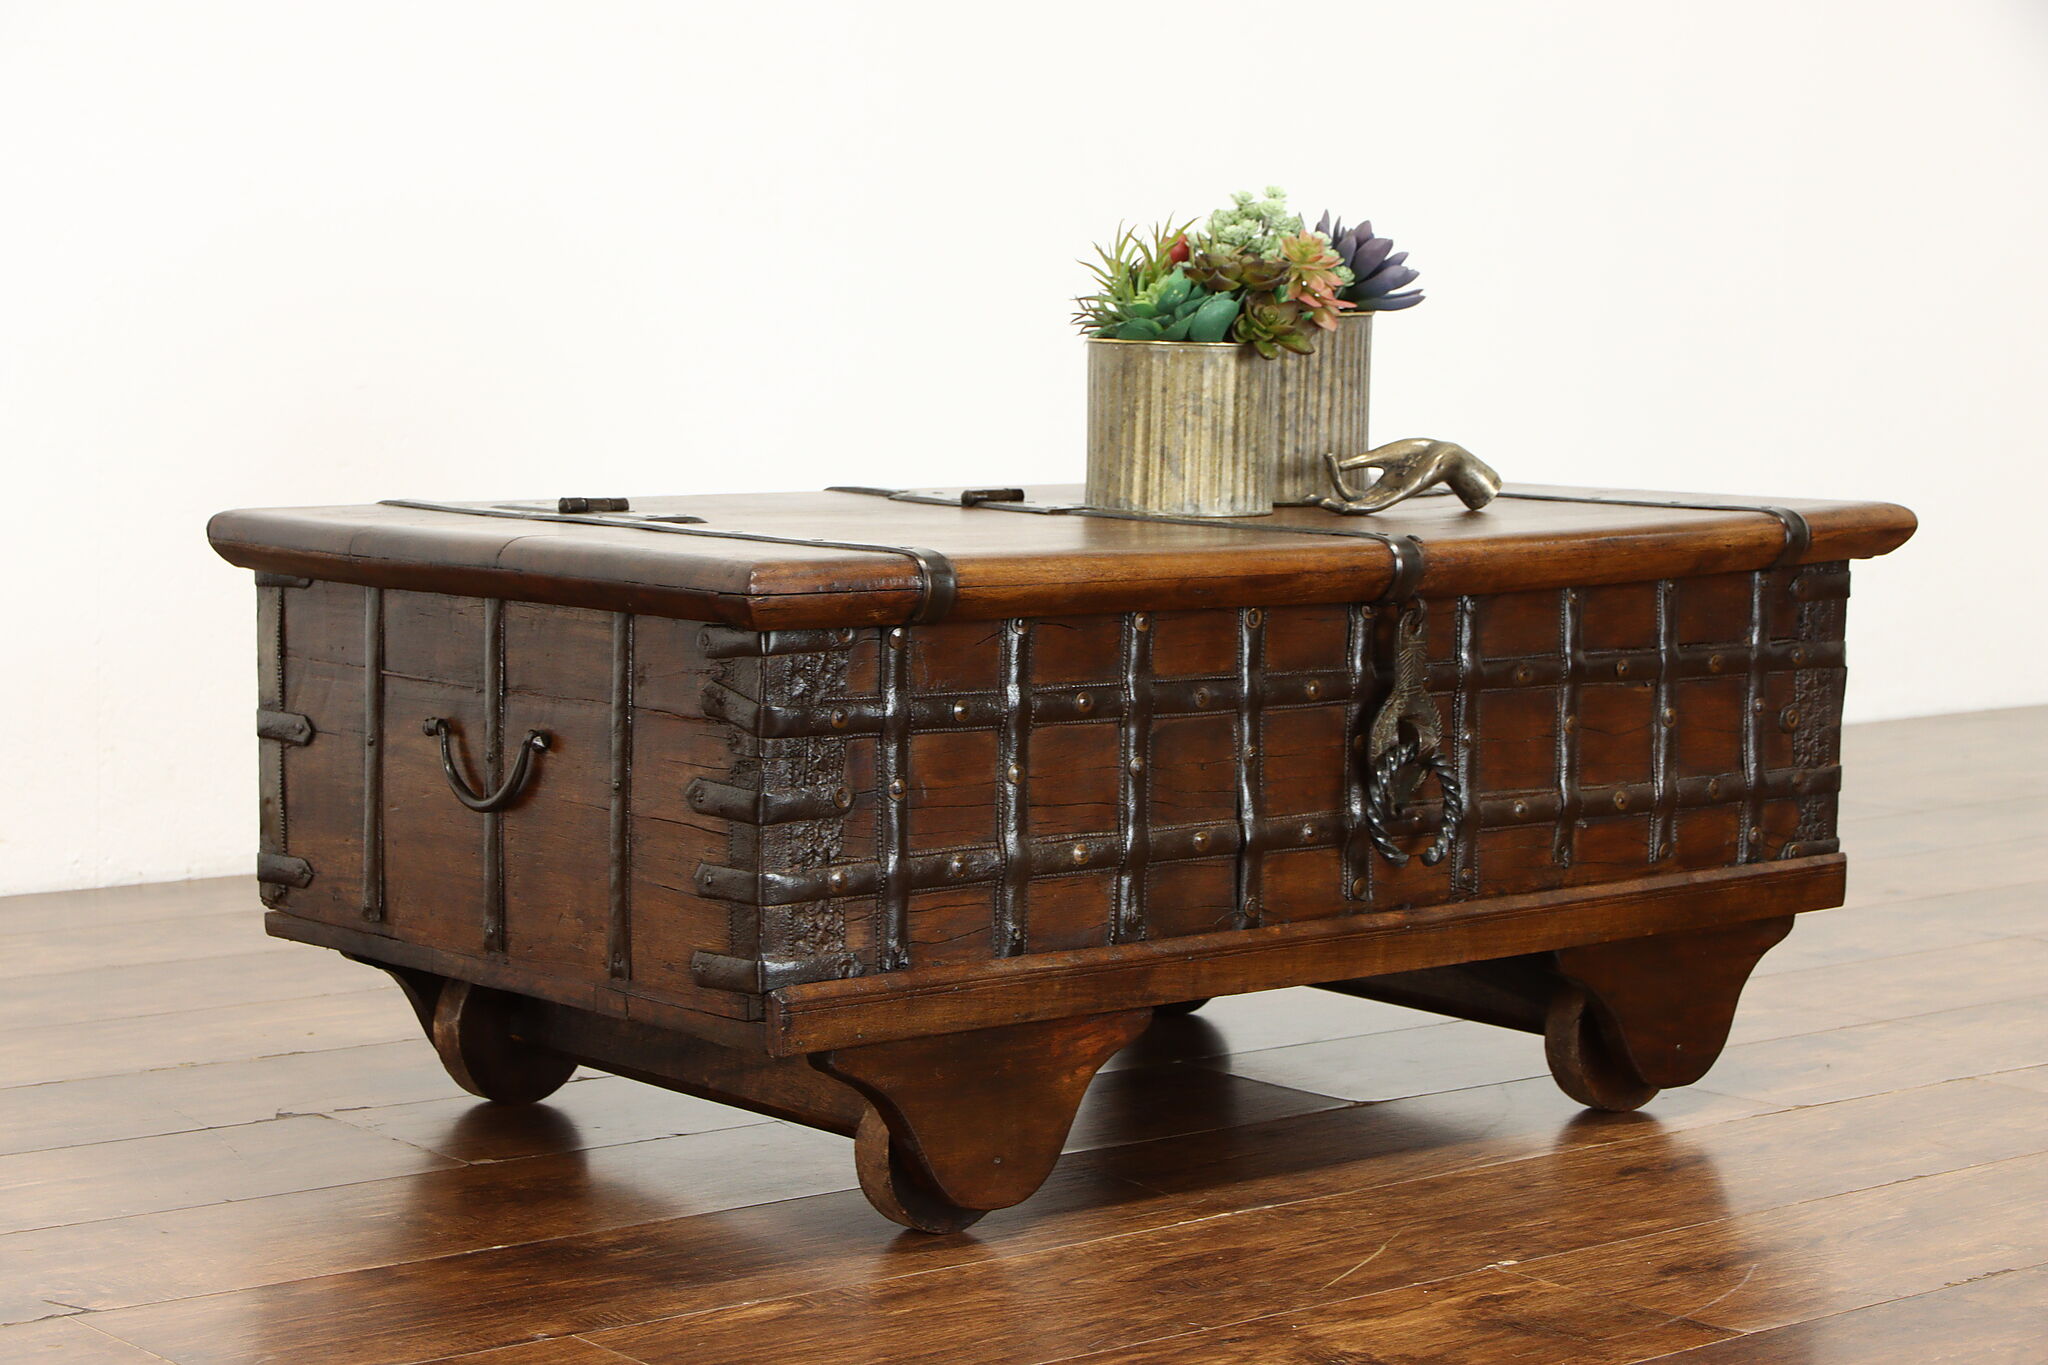 Asian Teak Marriage or Dowry Trunk, Blanket Chest, Coffee Table, Wheels